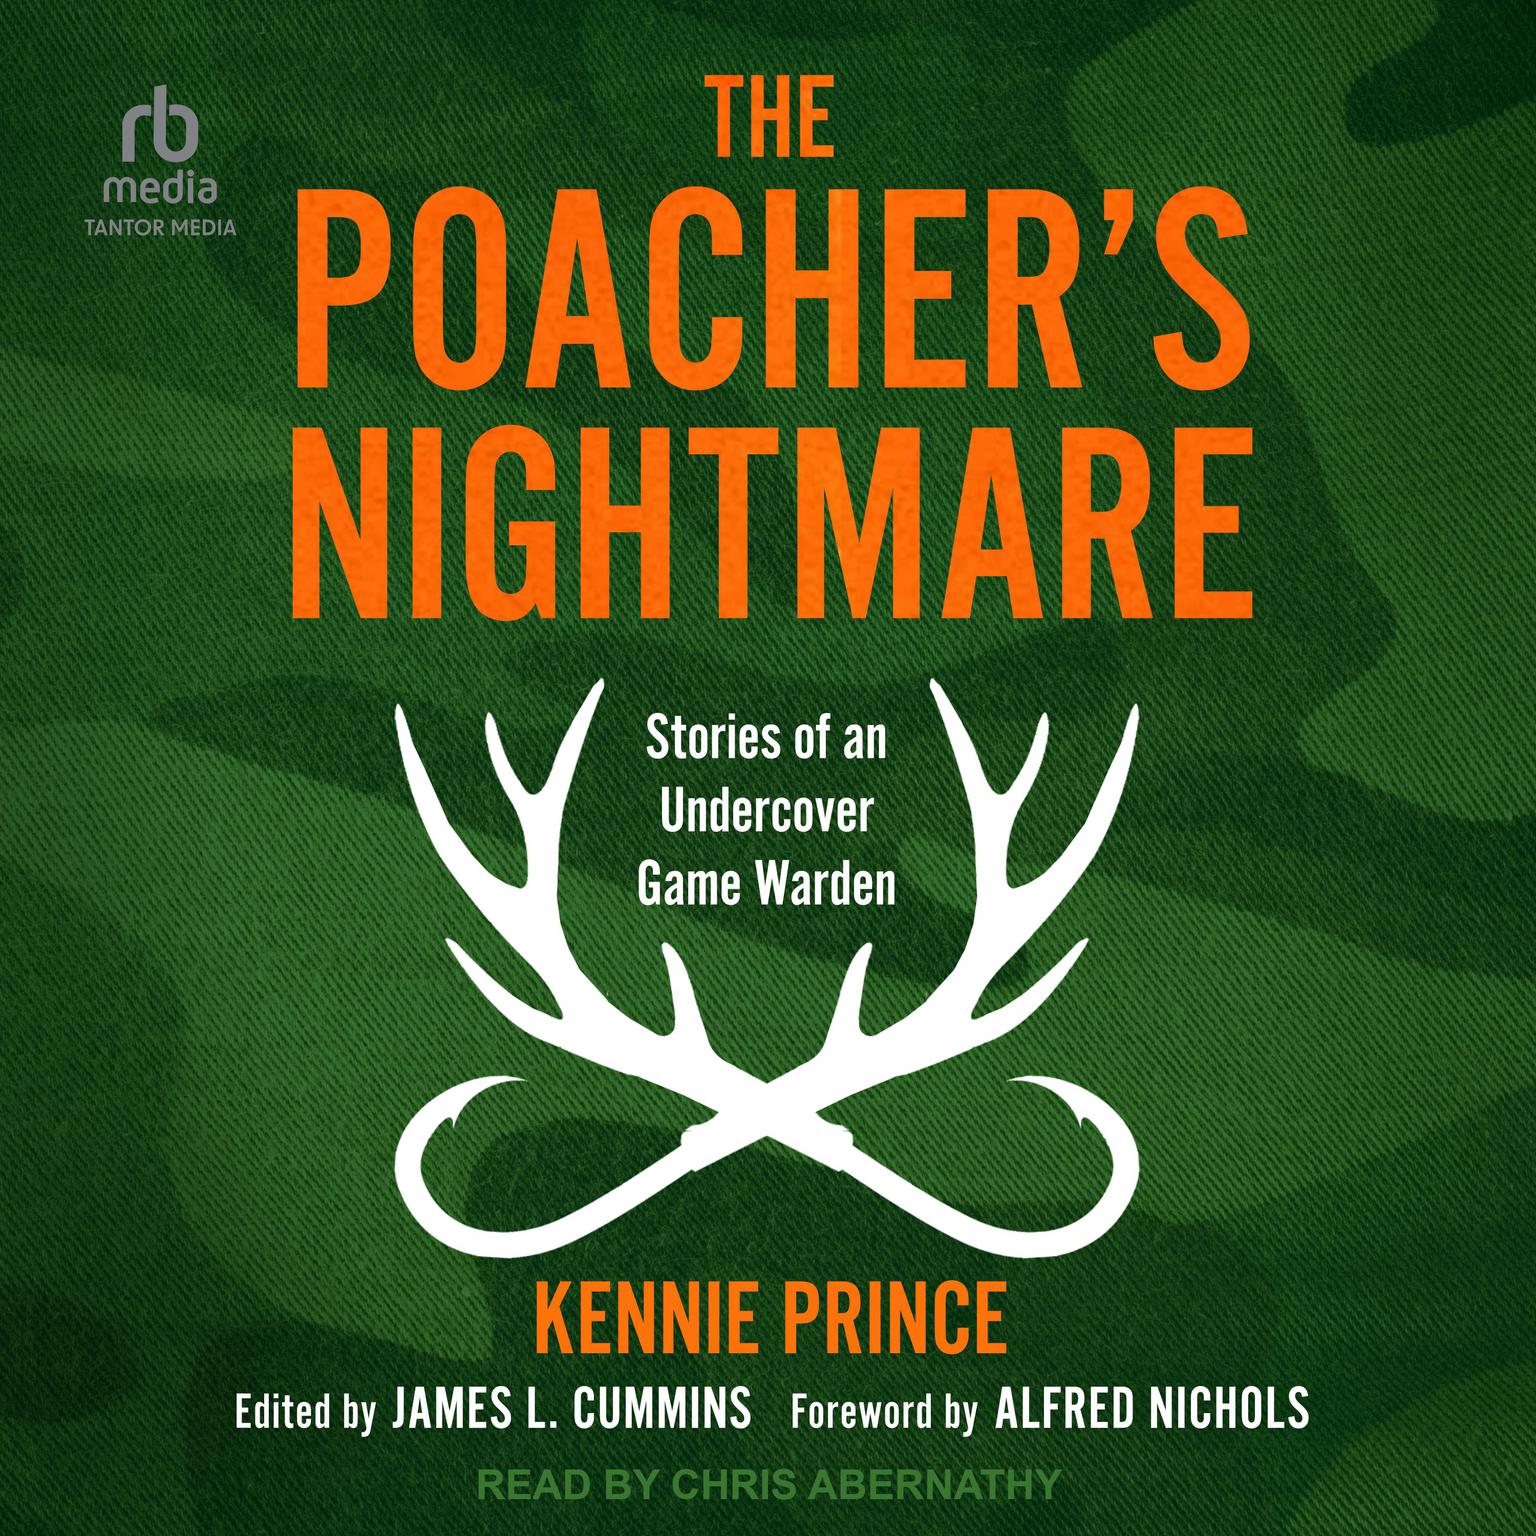 The Poachers Nightmare: Stories of an Undercover Game Warden Audiobook, by Kennie Prince